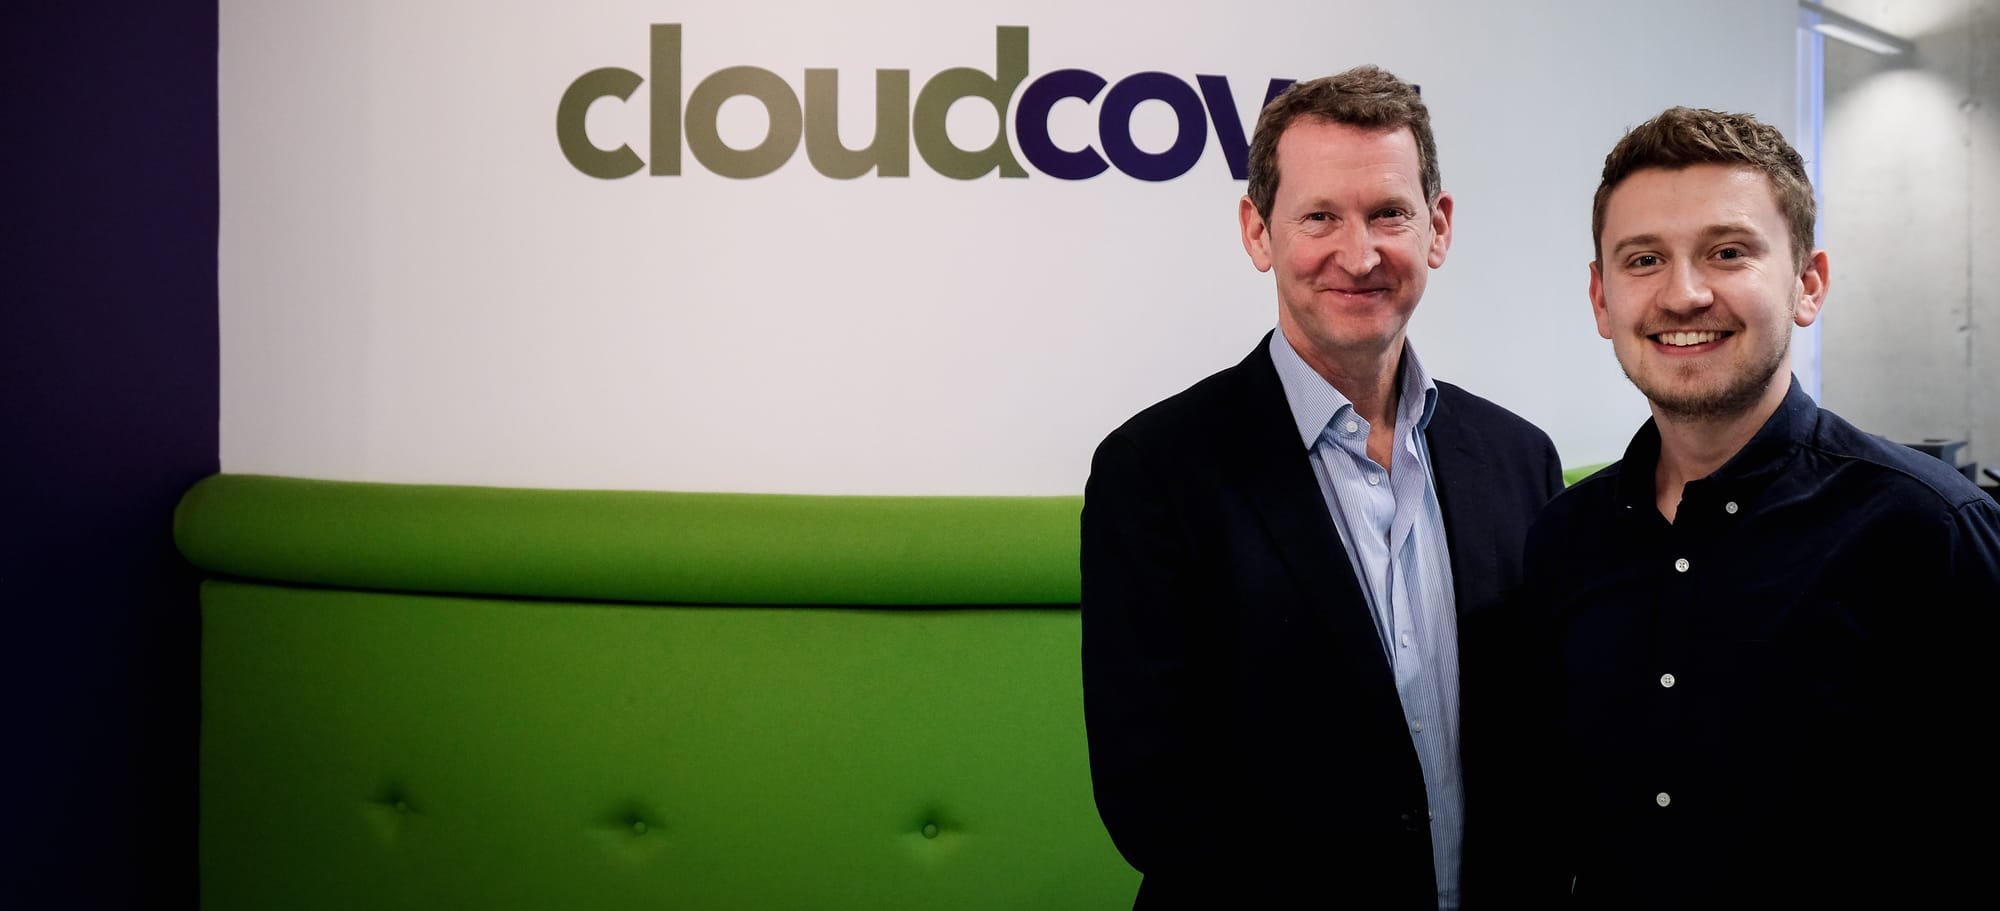 Glasgow-based Cloud Cover IT invests in new talent despite pandemic pressure